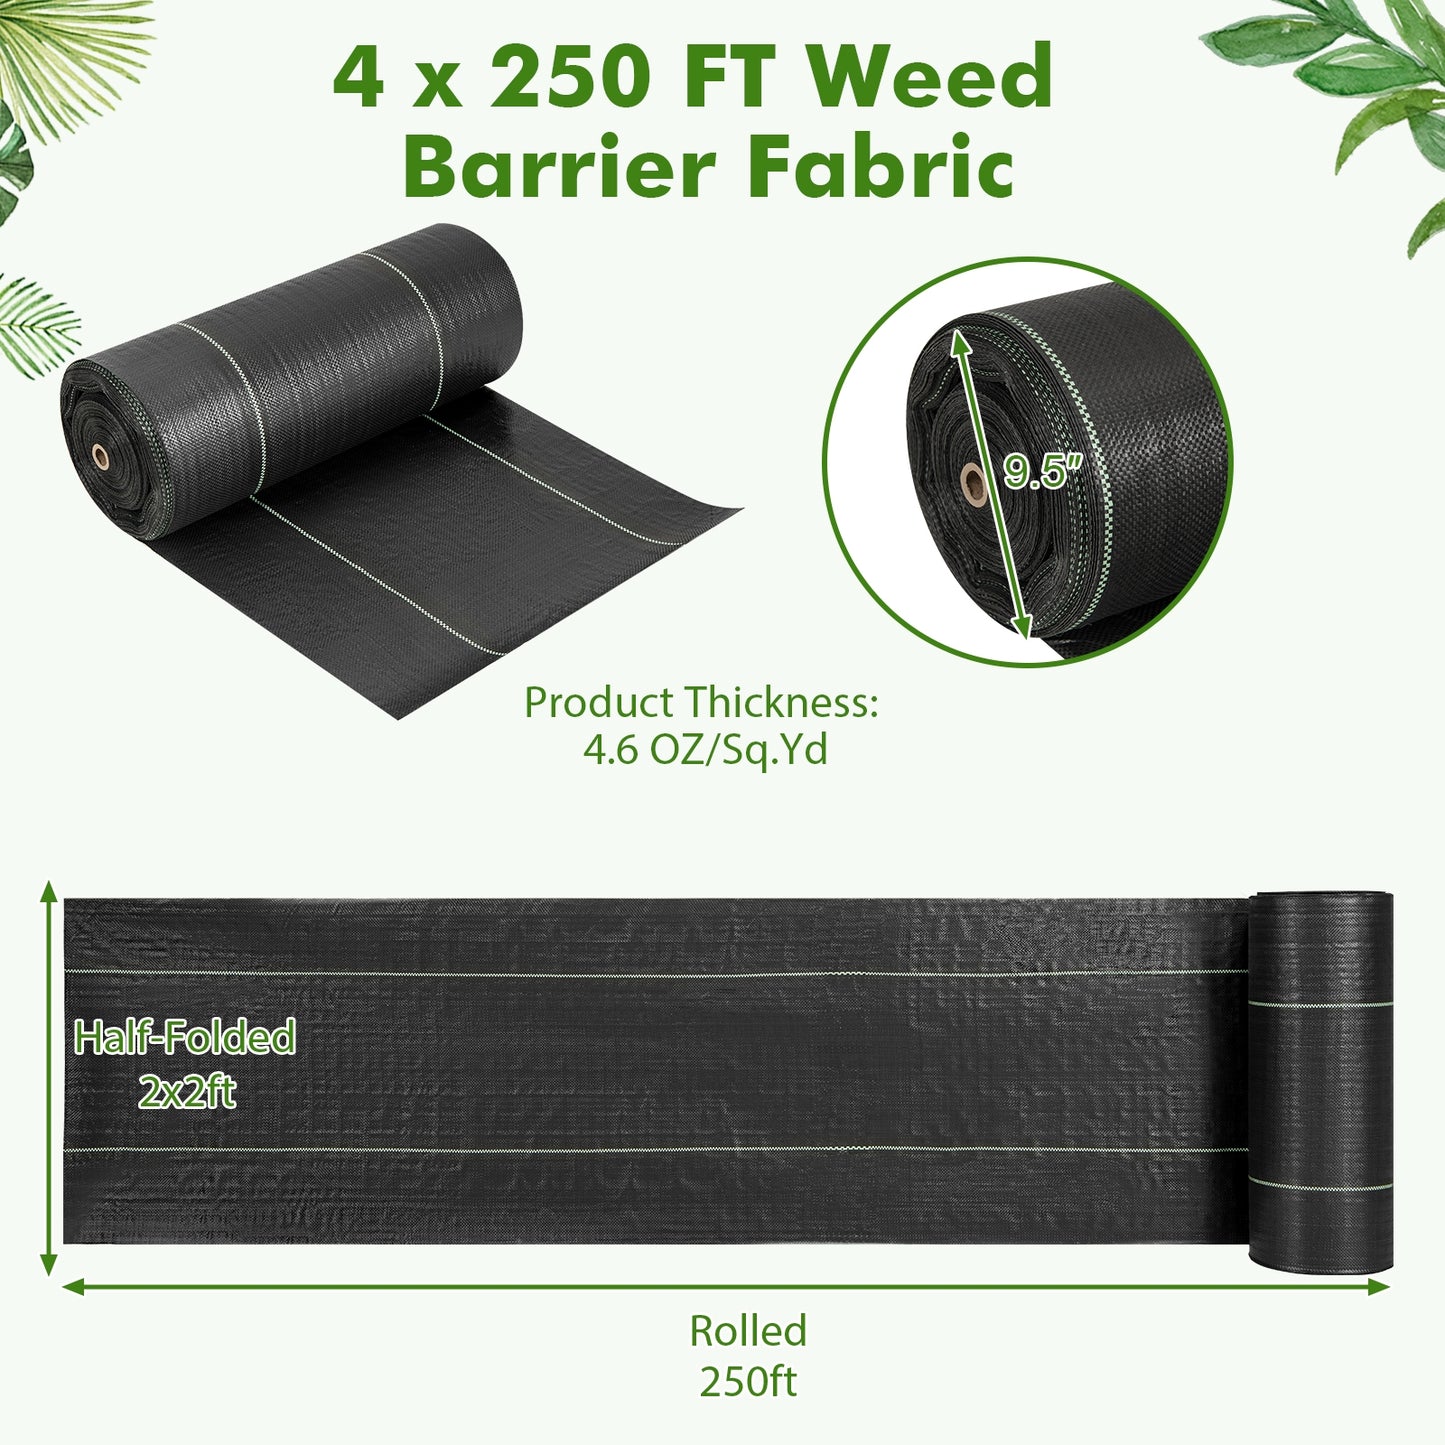 6.5 x 330/4 x 250/6 x 300 Feet Weed Barrier Landscape Fabric-4 ft